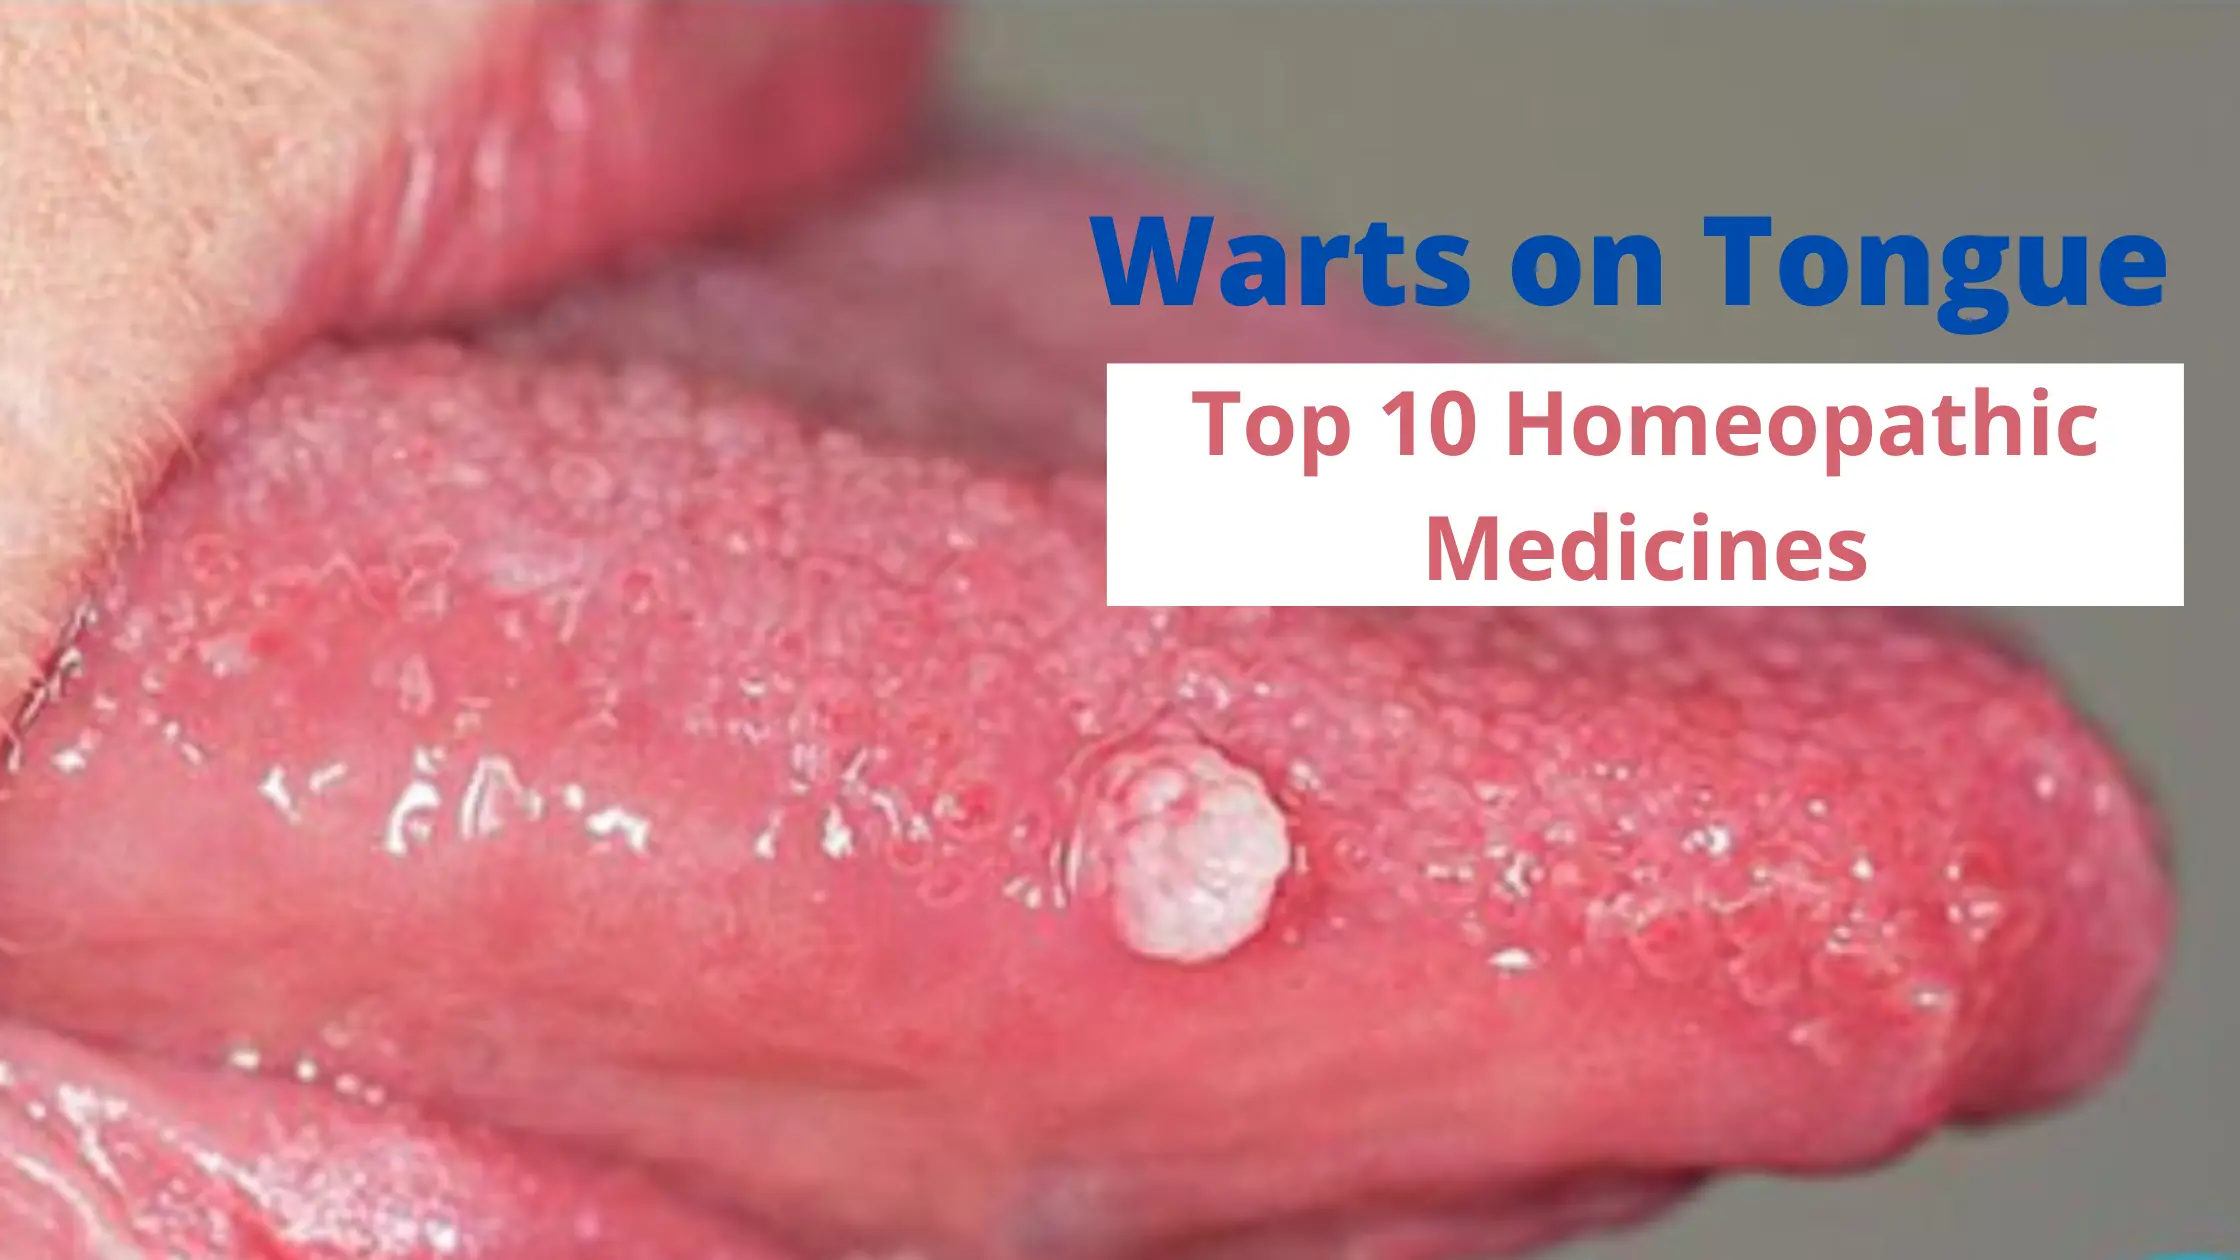 Warts on Tongue - Causes & Best 10 Homeopathic Medicines